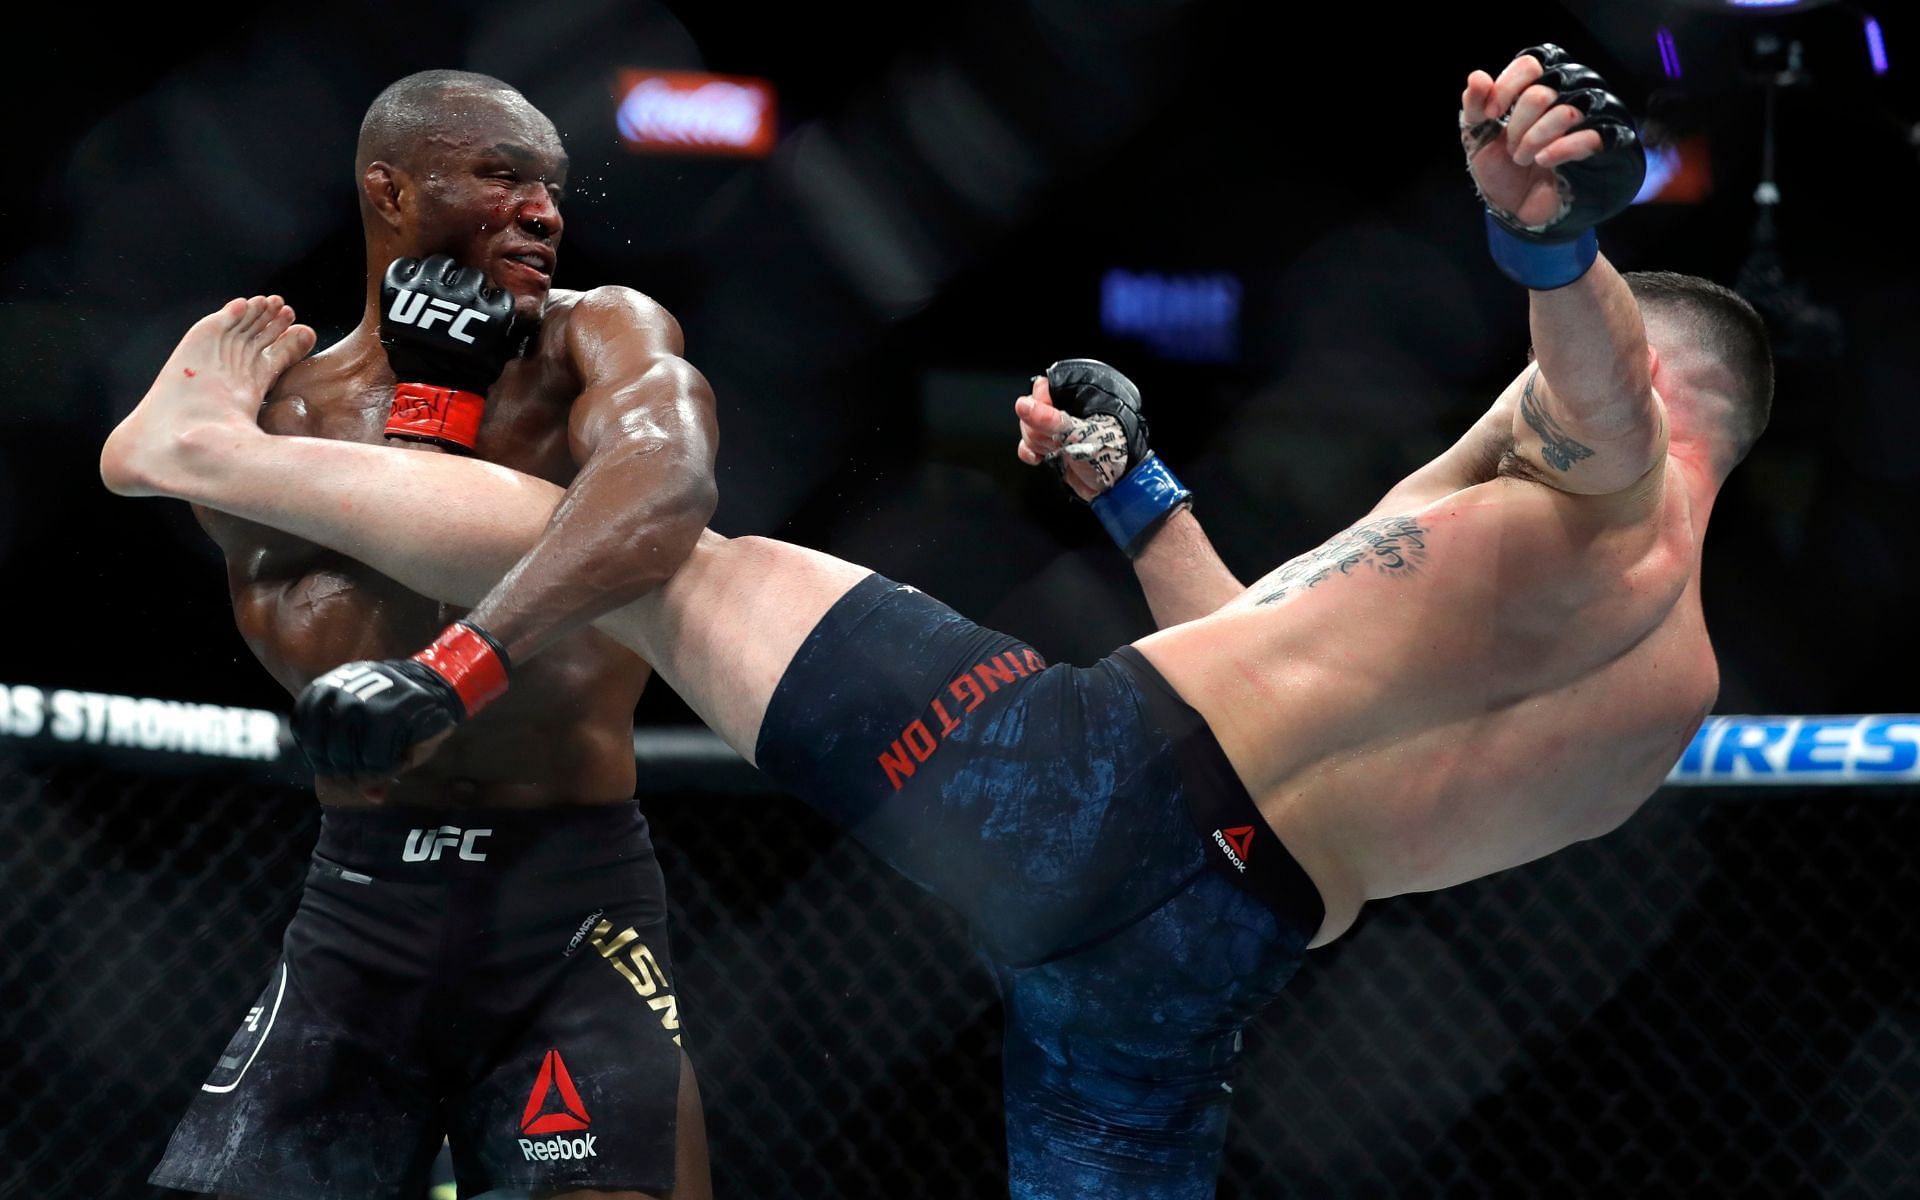 UFC welterweight champion Kamaru Usman in action against No.1 contender Colby Covington at UFC 245 on December 14, 2019